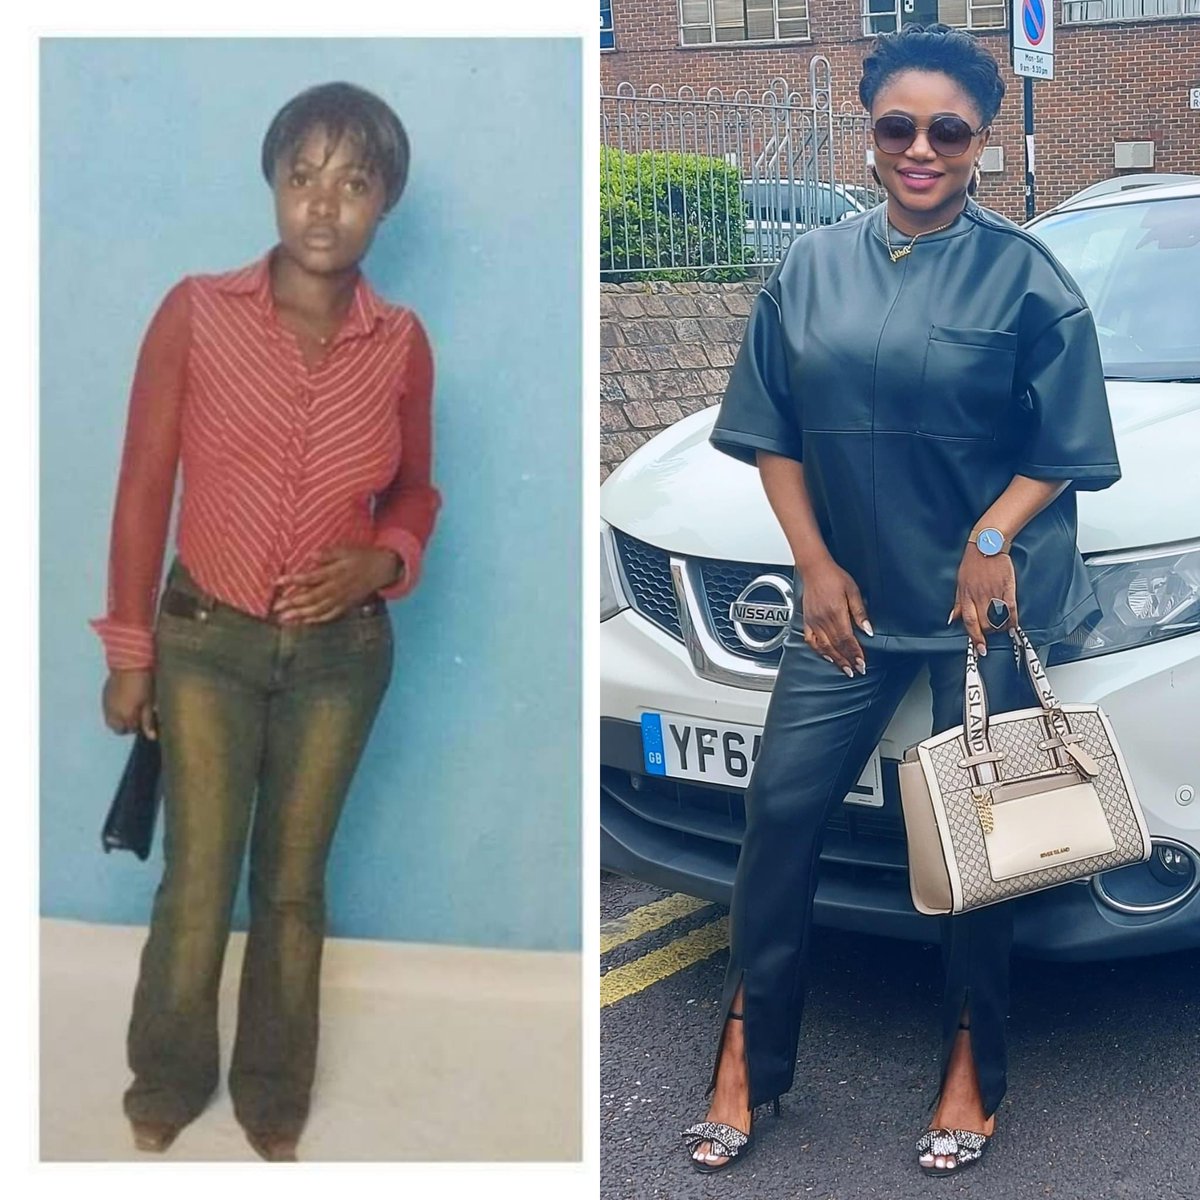 20years Challenge 😊
If you care eh, GIVE UP ya! 
#ReceiveSense #IntentionalLiving